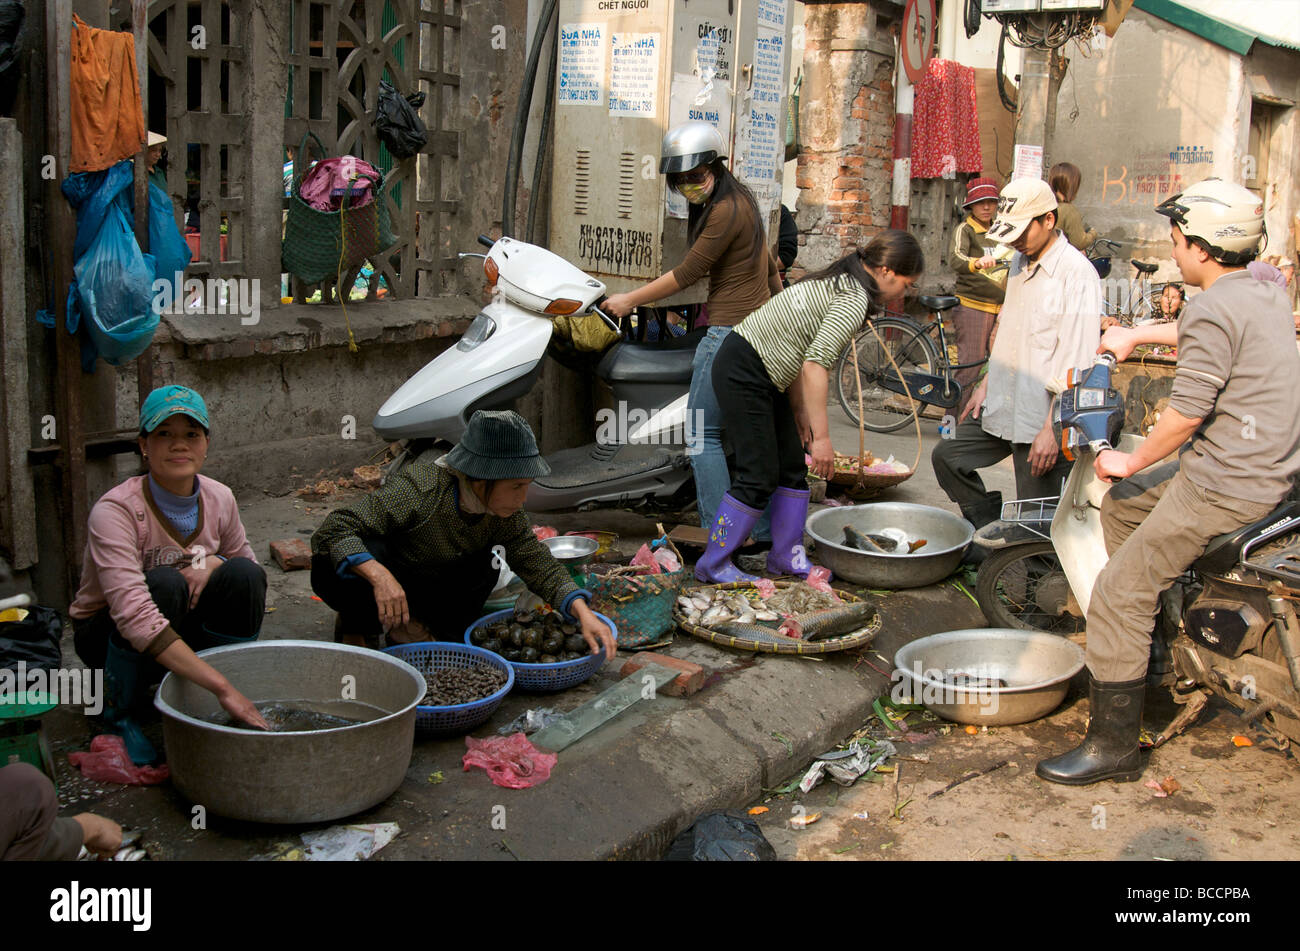 A pavement market stall selling water chestnuts & live catfish in Hanoi's Old Quarter Stock Photo